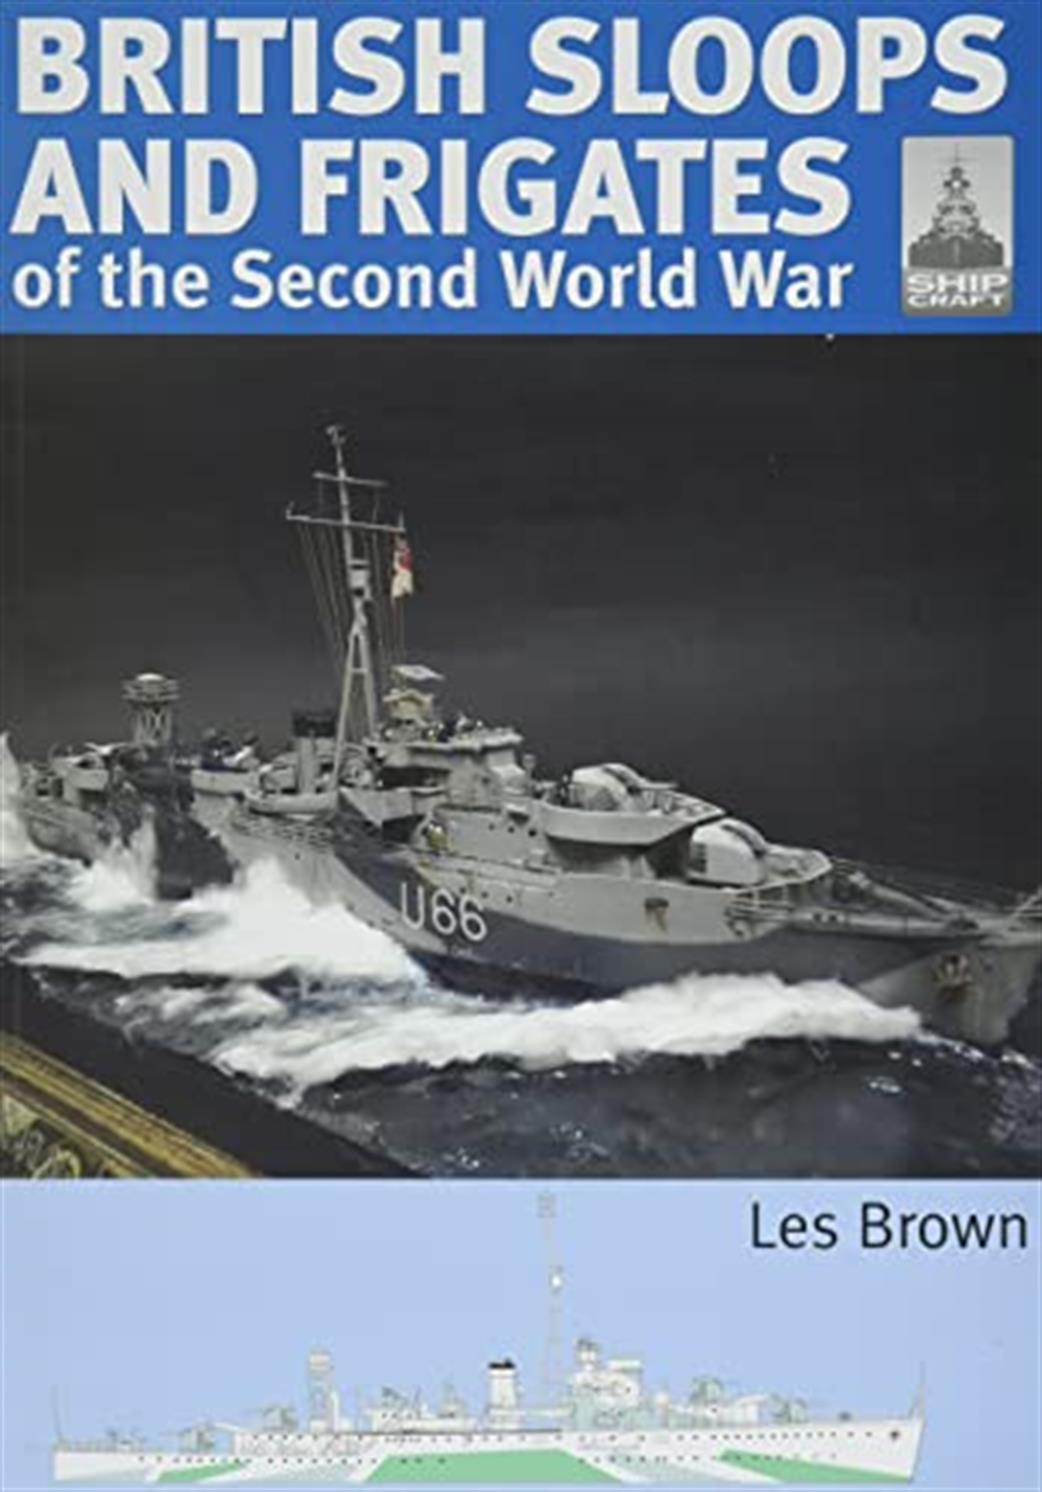 Seaforth Publishing  9781526793874 British Sloops and Frigates of the Second World War Book By Les Brown